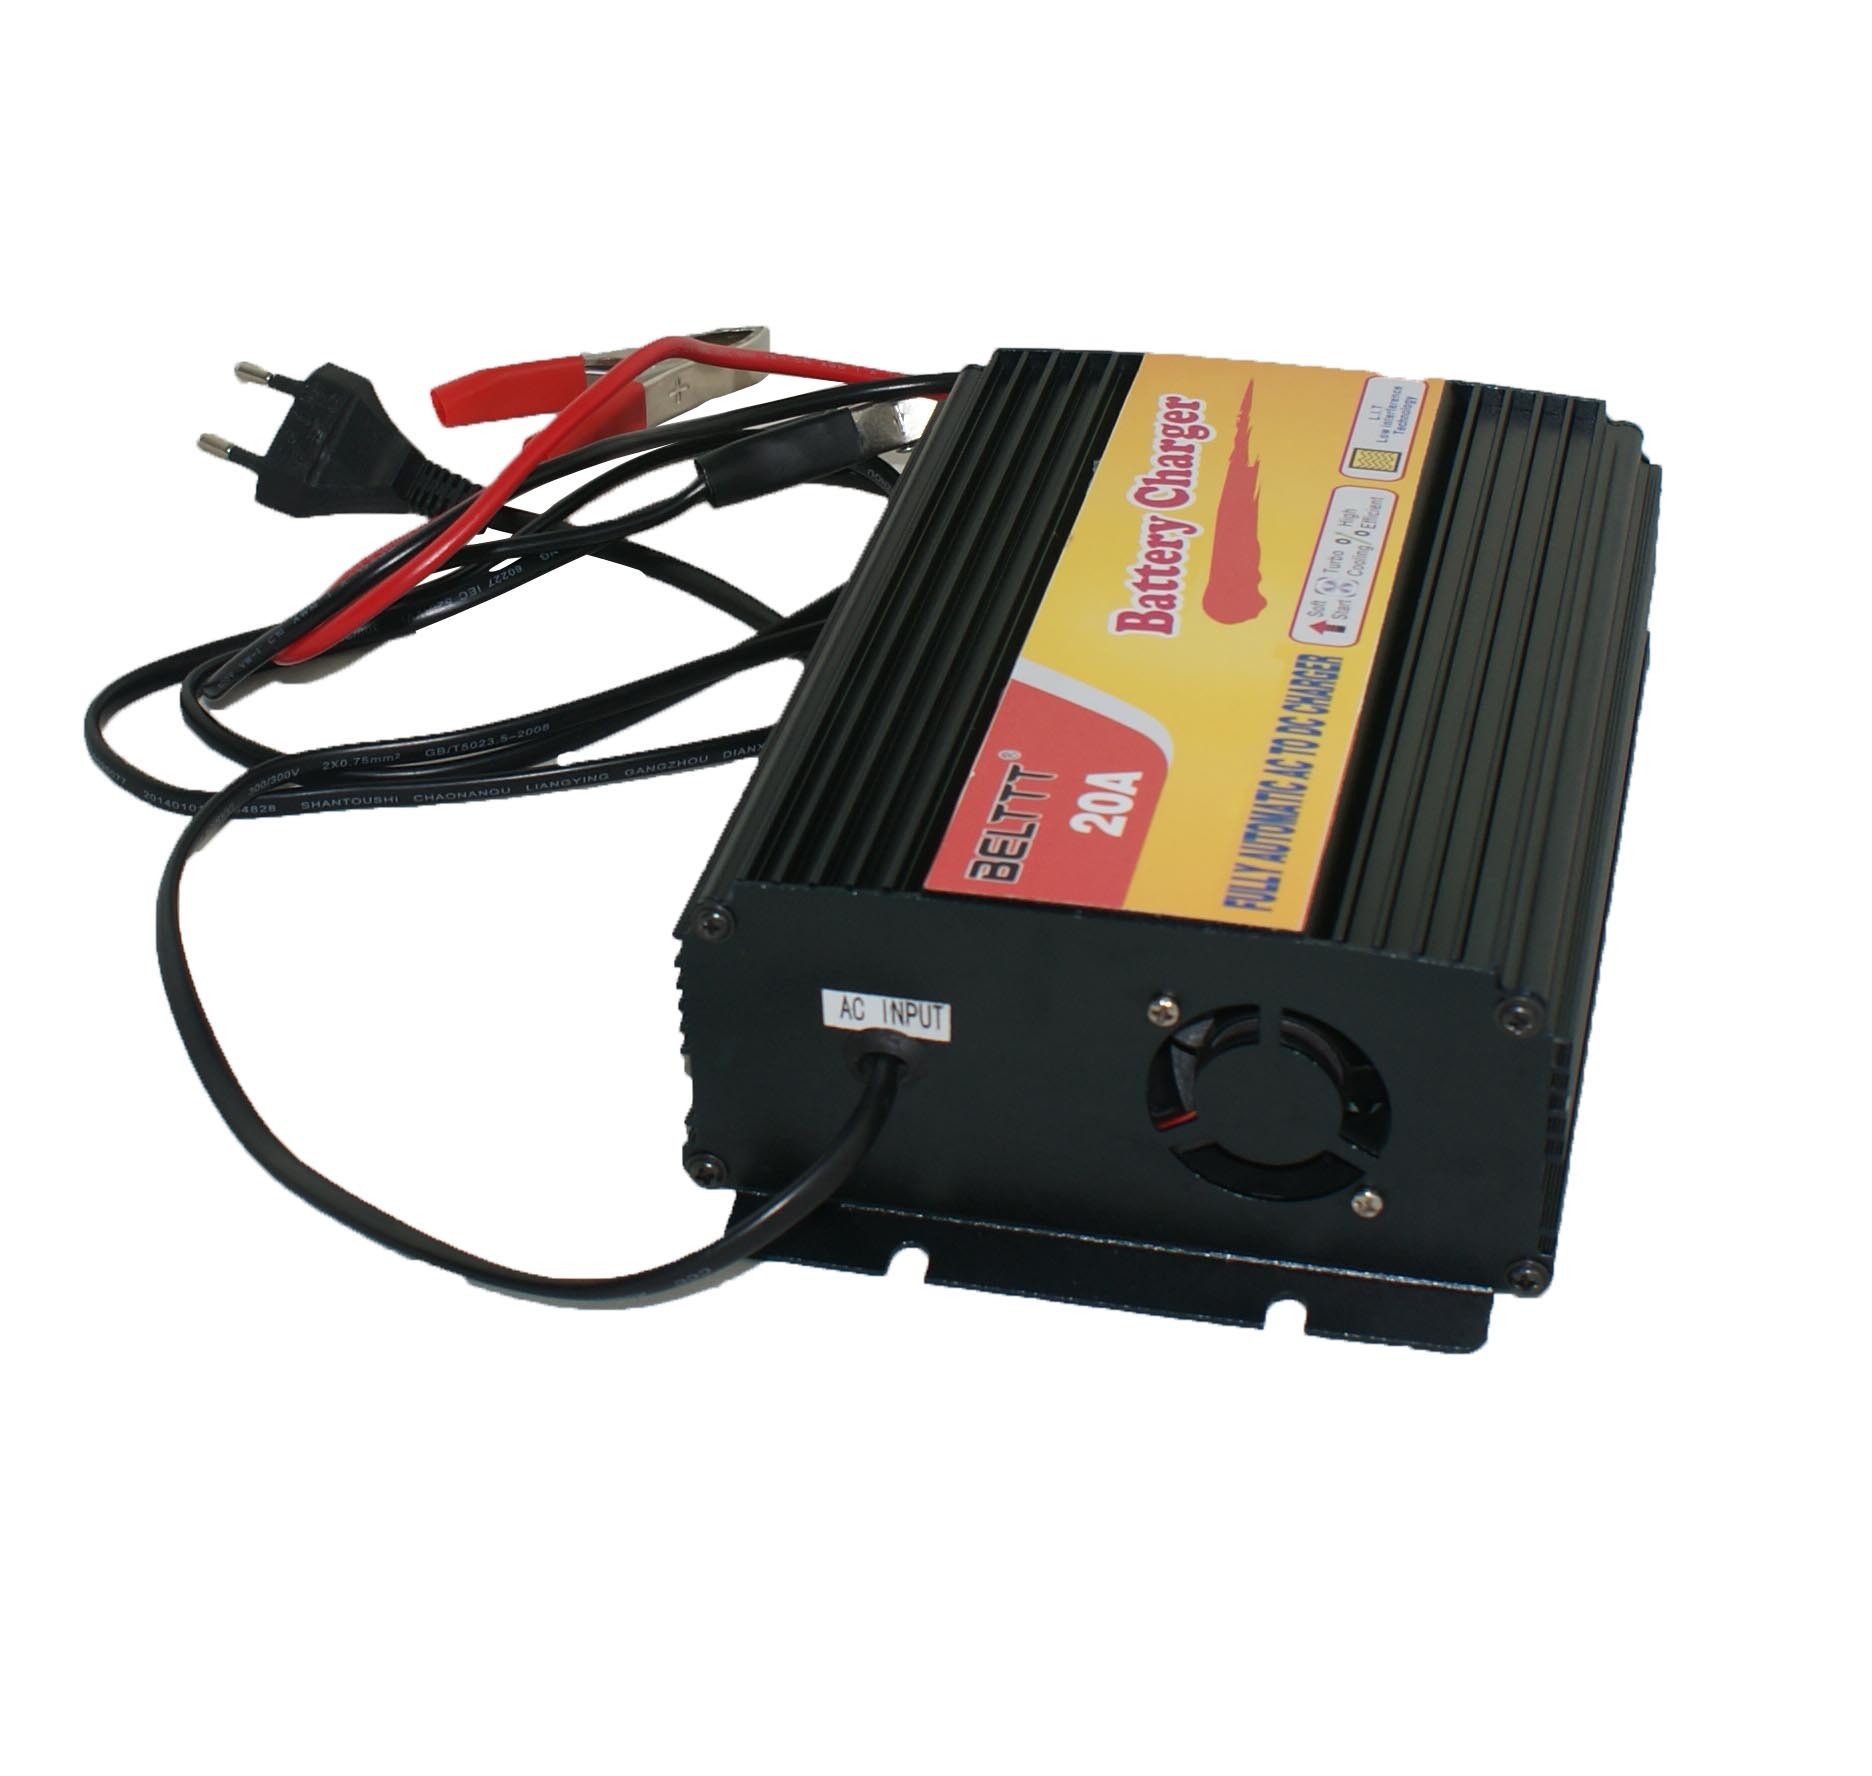 Good Quality 12V Battery Charger 20A for Car Battery, Lead Acid Battery, Storage Battery or Home Battery